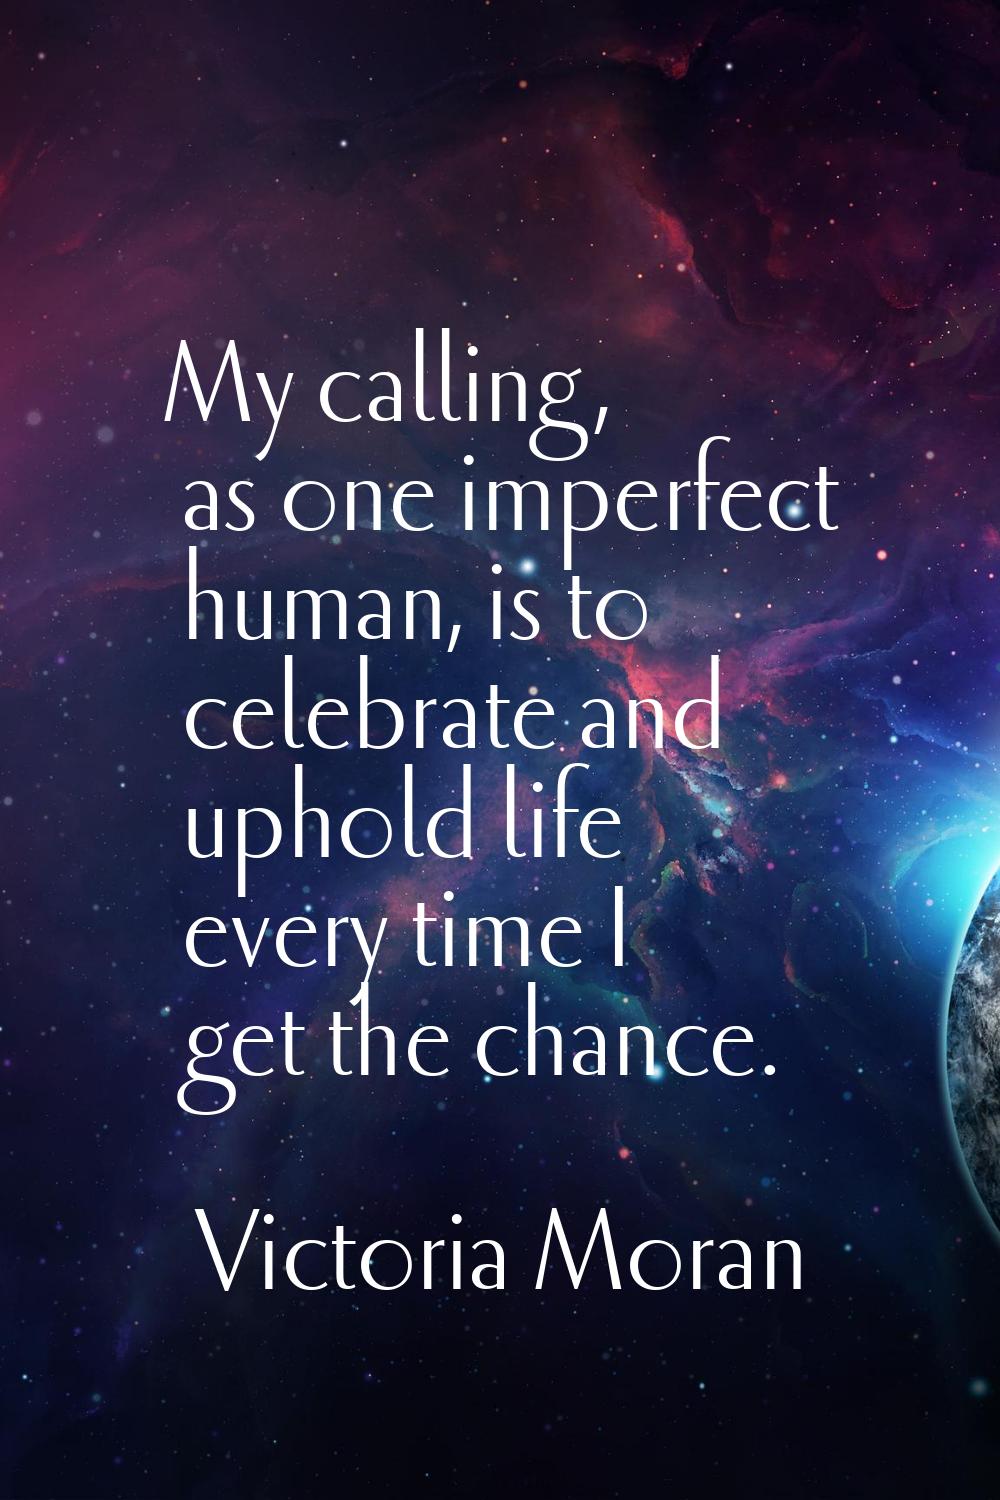 My calling, as one imperfect human, is to celebrate and uphold life every time I get the chance.